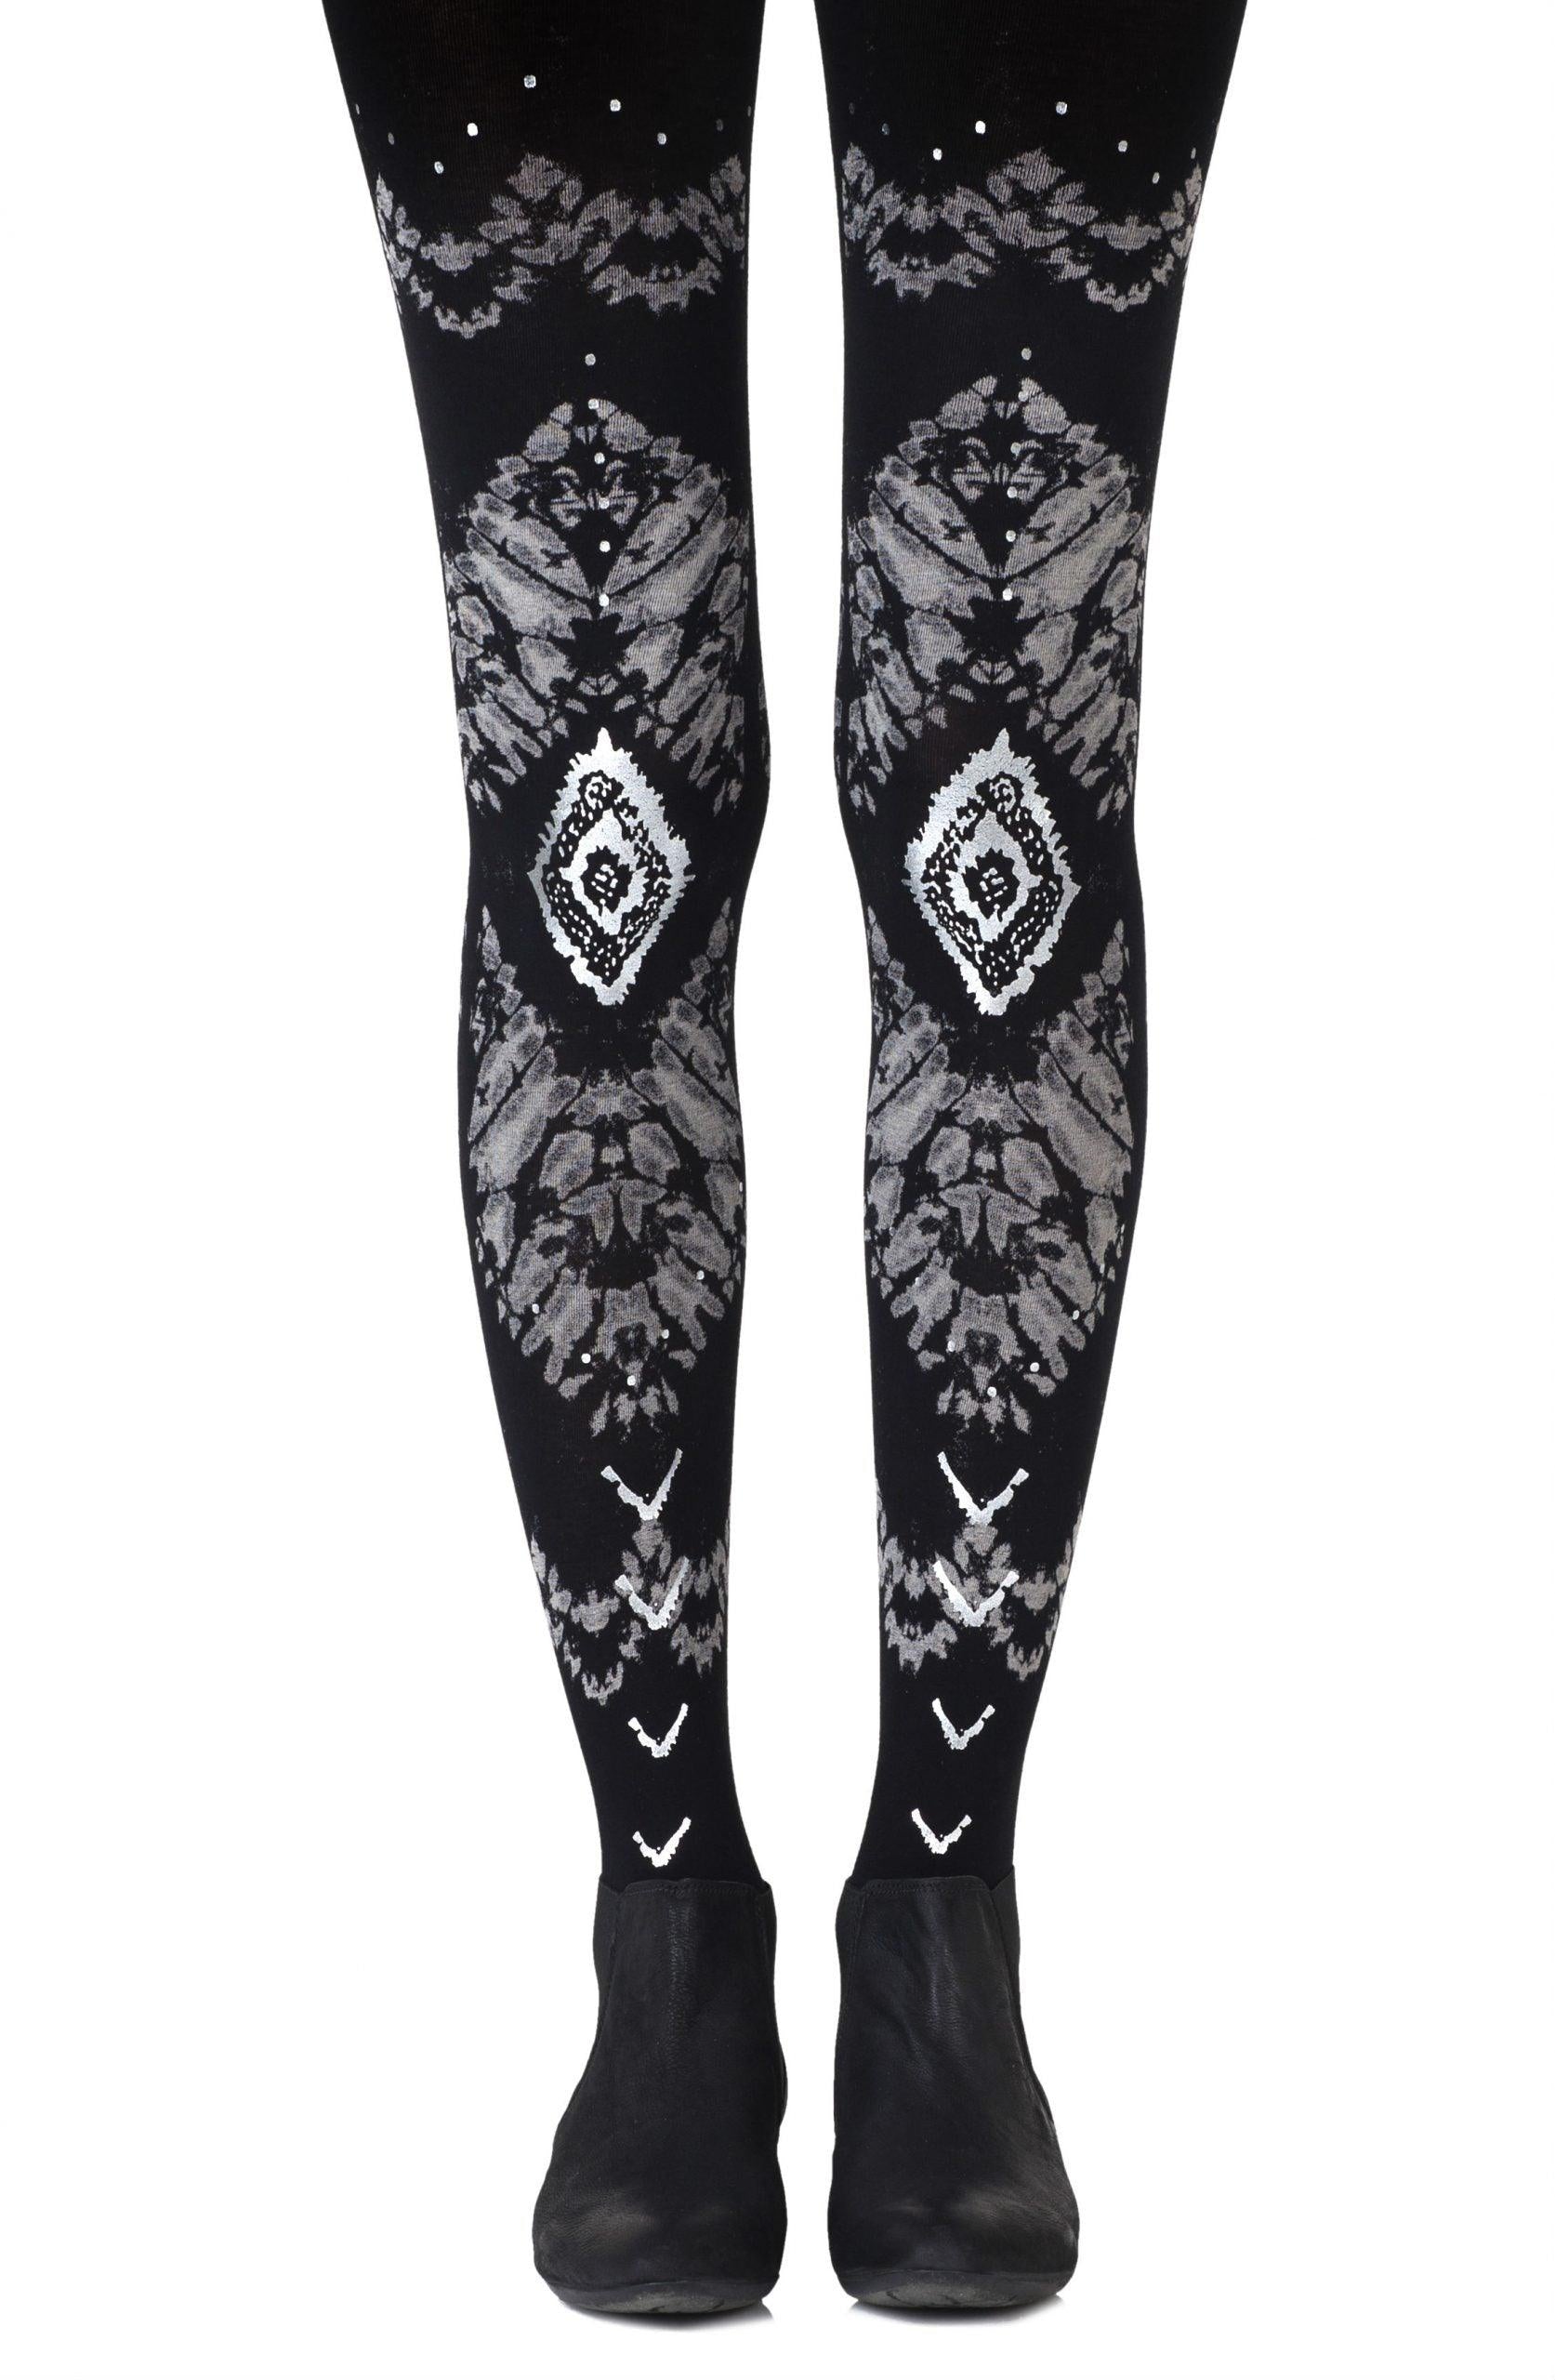 Zohara "The Long And Winding Road" Black Print Tights - Sydney Rose Lingerie 